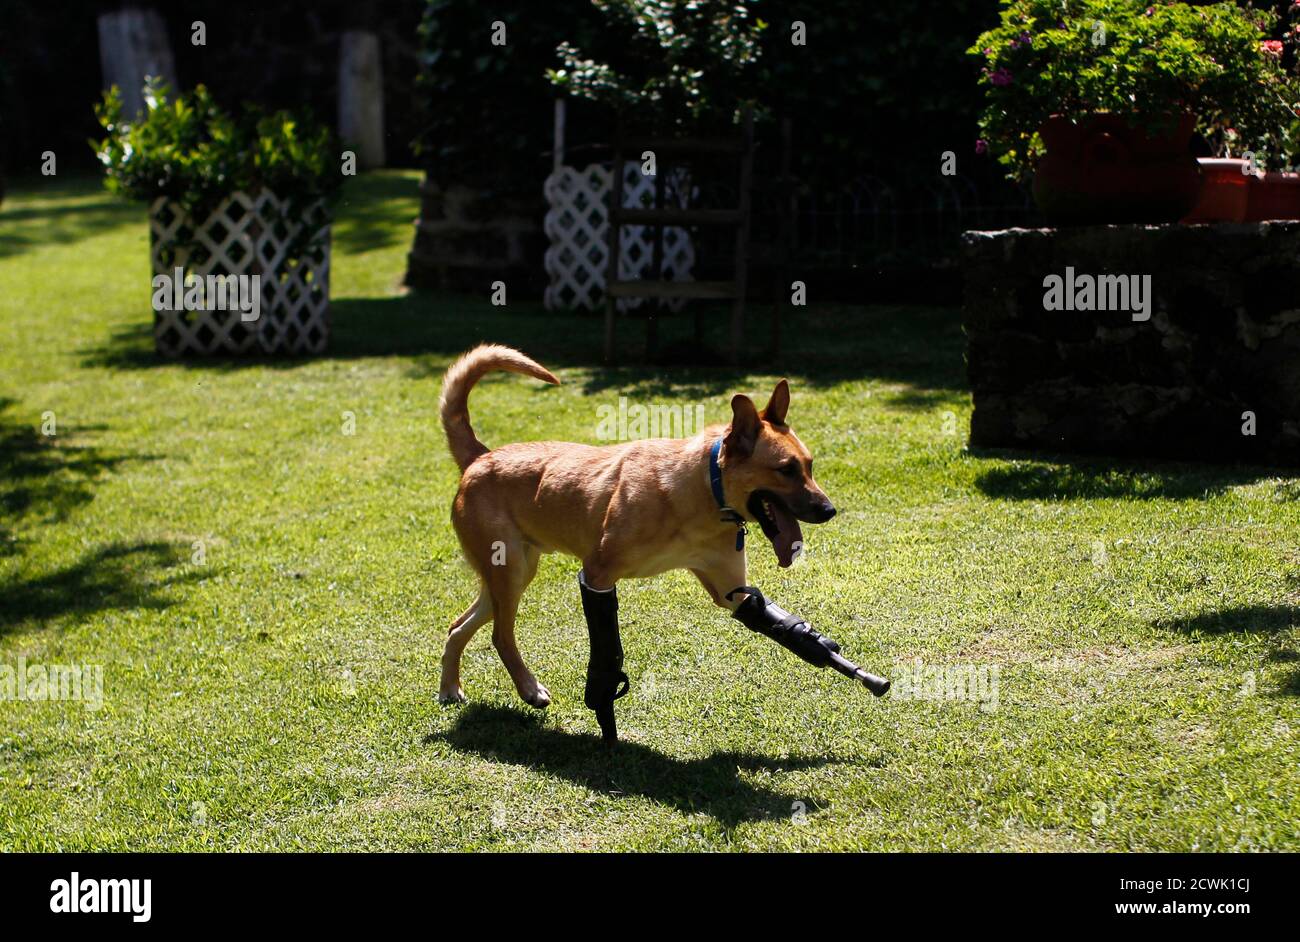 A dog named Pay de Limon, runs fitted with two front prosthetic legs at the Milagros Caninos rescue shelter in Mexico City August 29, 2012. Members of a drug gang in the Mexican state of Zacatecas chopped off Limon's paws to practise cutting fingers off kidnapped people, according to Milagros Caninos founder Patricia Ruiz. Fresnillo residents found Limon in a dumpster bleeding and legless. After administering first aid procedures, they managed to take him to Milagros Caninos, an association that rehabilitates dogs that have suffered extreme abuse. The prosthetic limbs were made at OrthoPets in Stock Photo